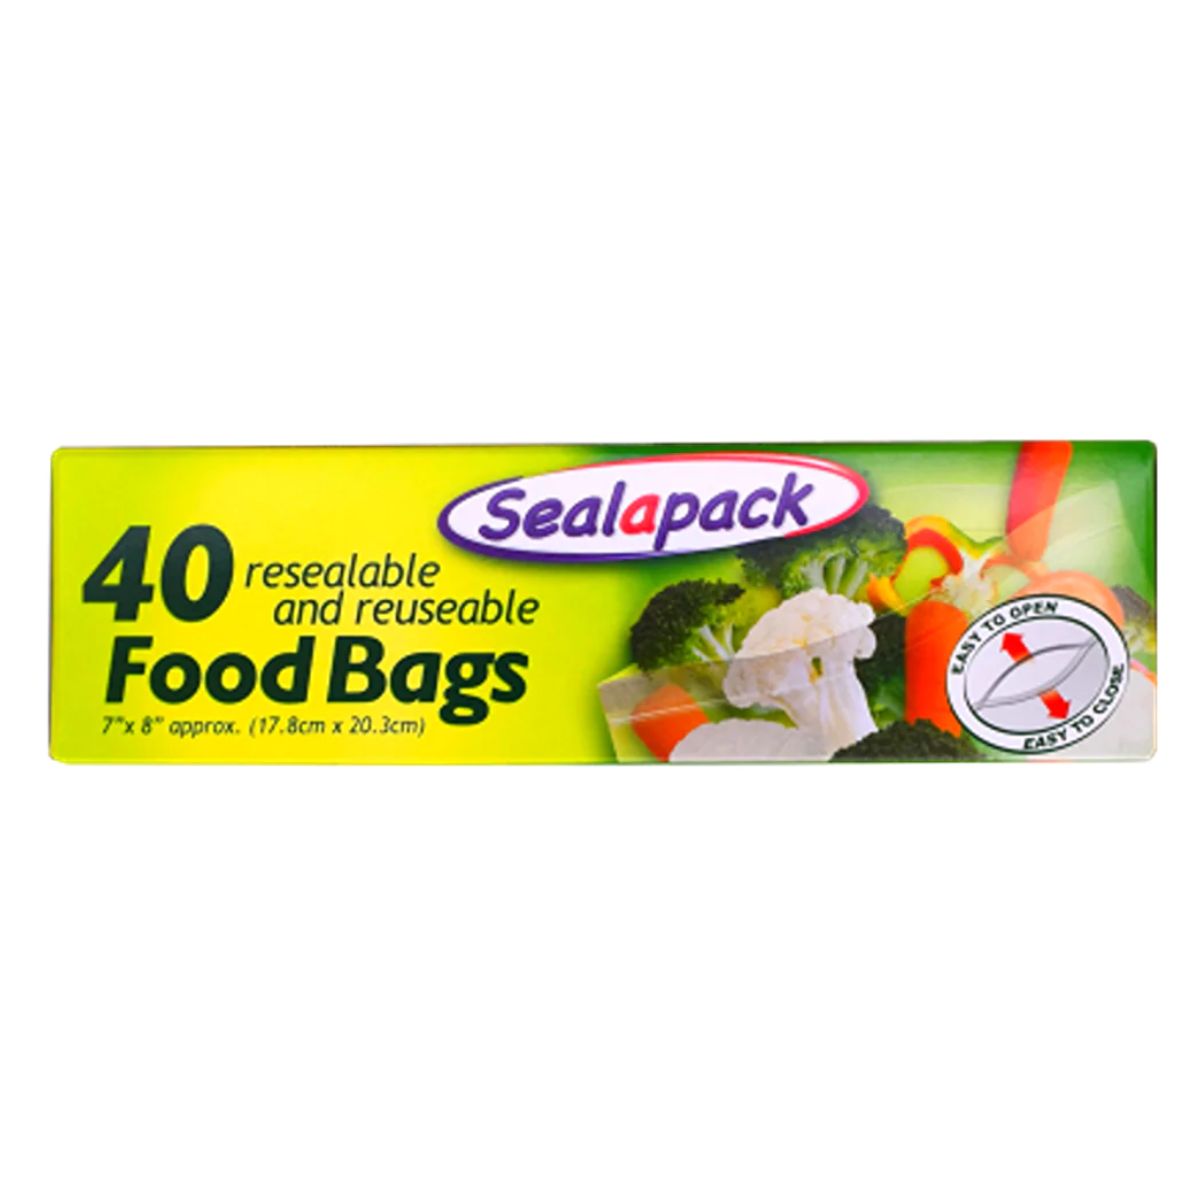 A pack of Sealapack - Resealable Food Bags - 40 Pack.